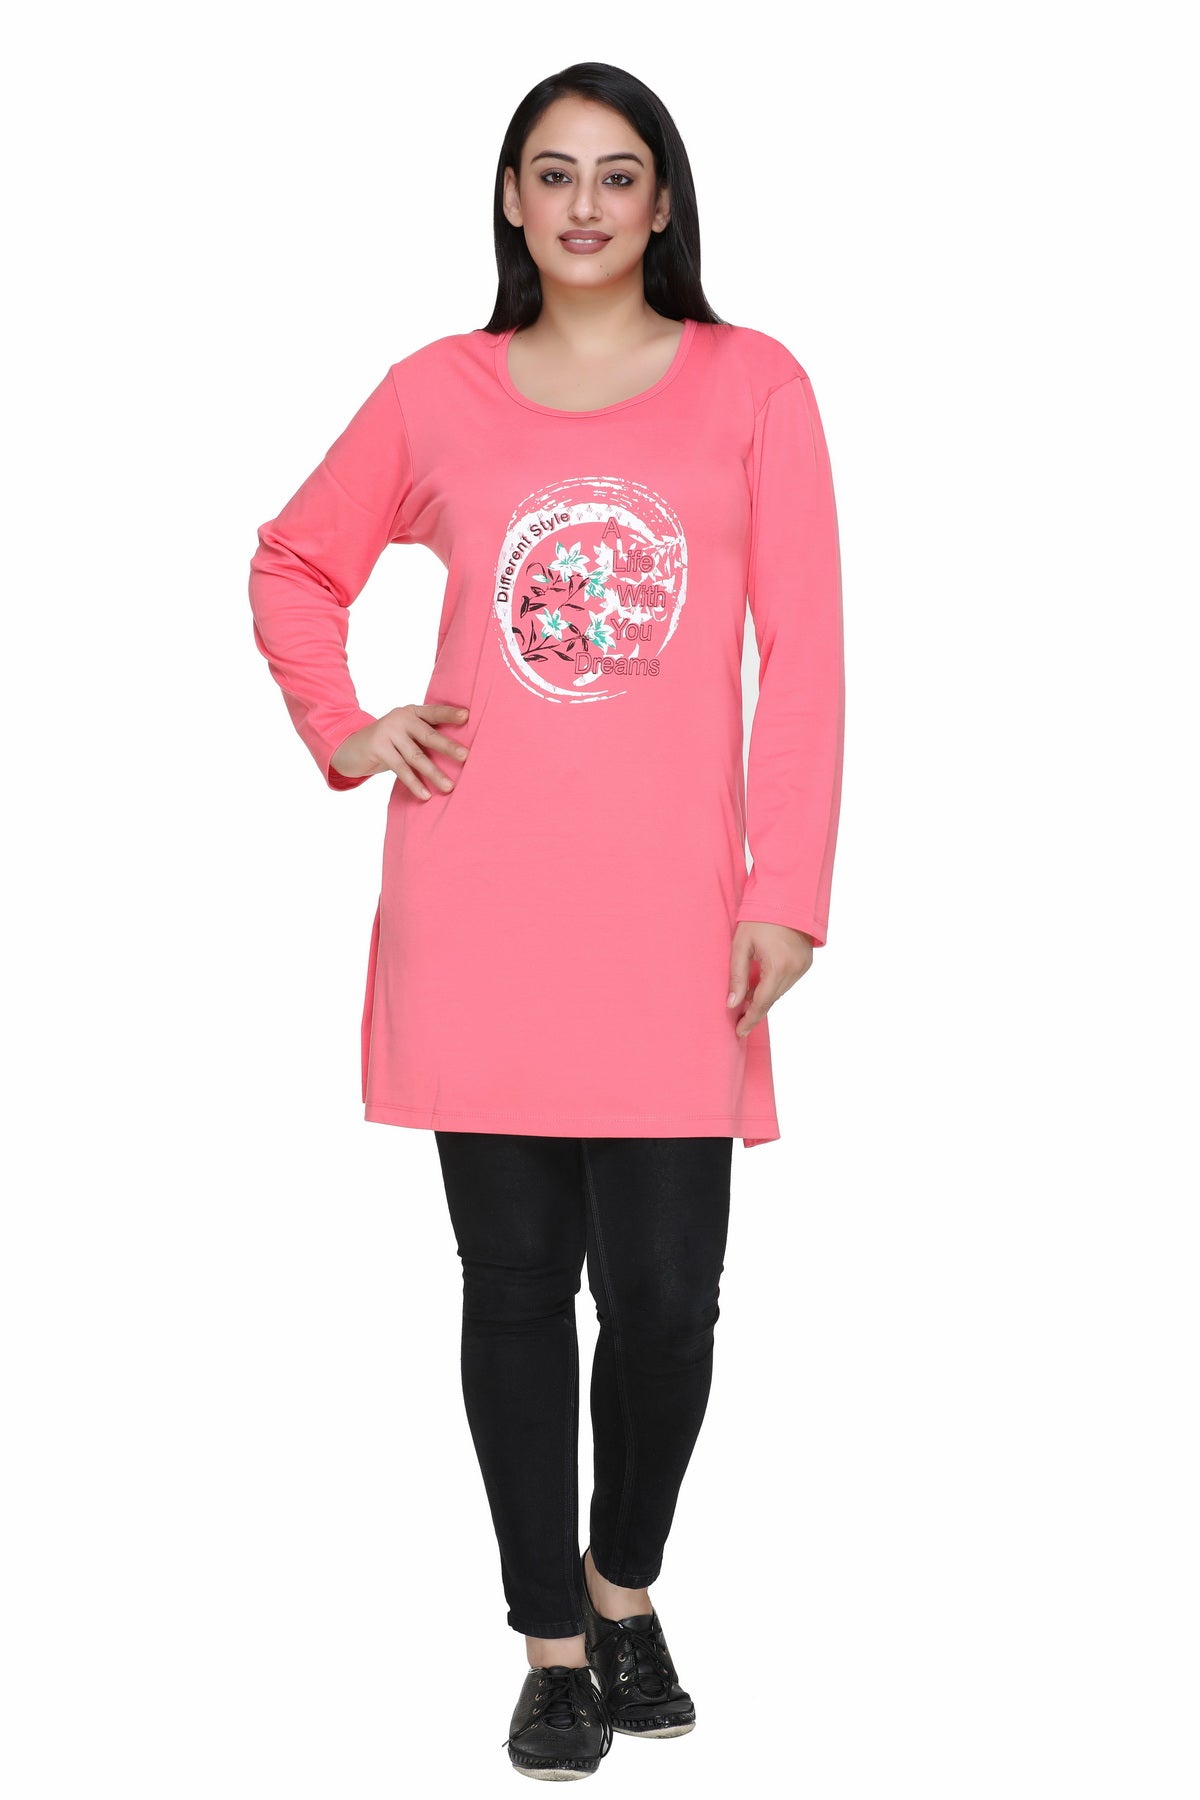 Cupid Women Plus Size Full Sleeves Cotton Long Top for Winter and Semi Winter For Women (Blush Pink) freeshipping - Cupid Clothings